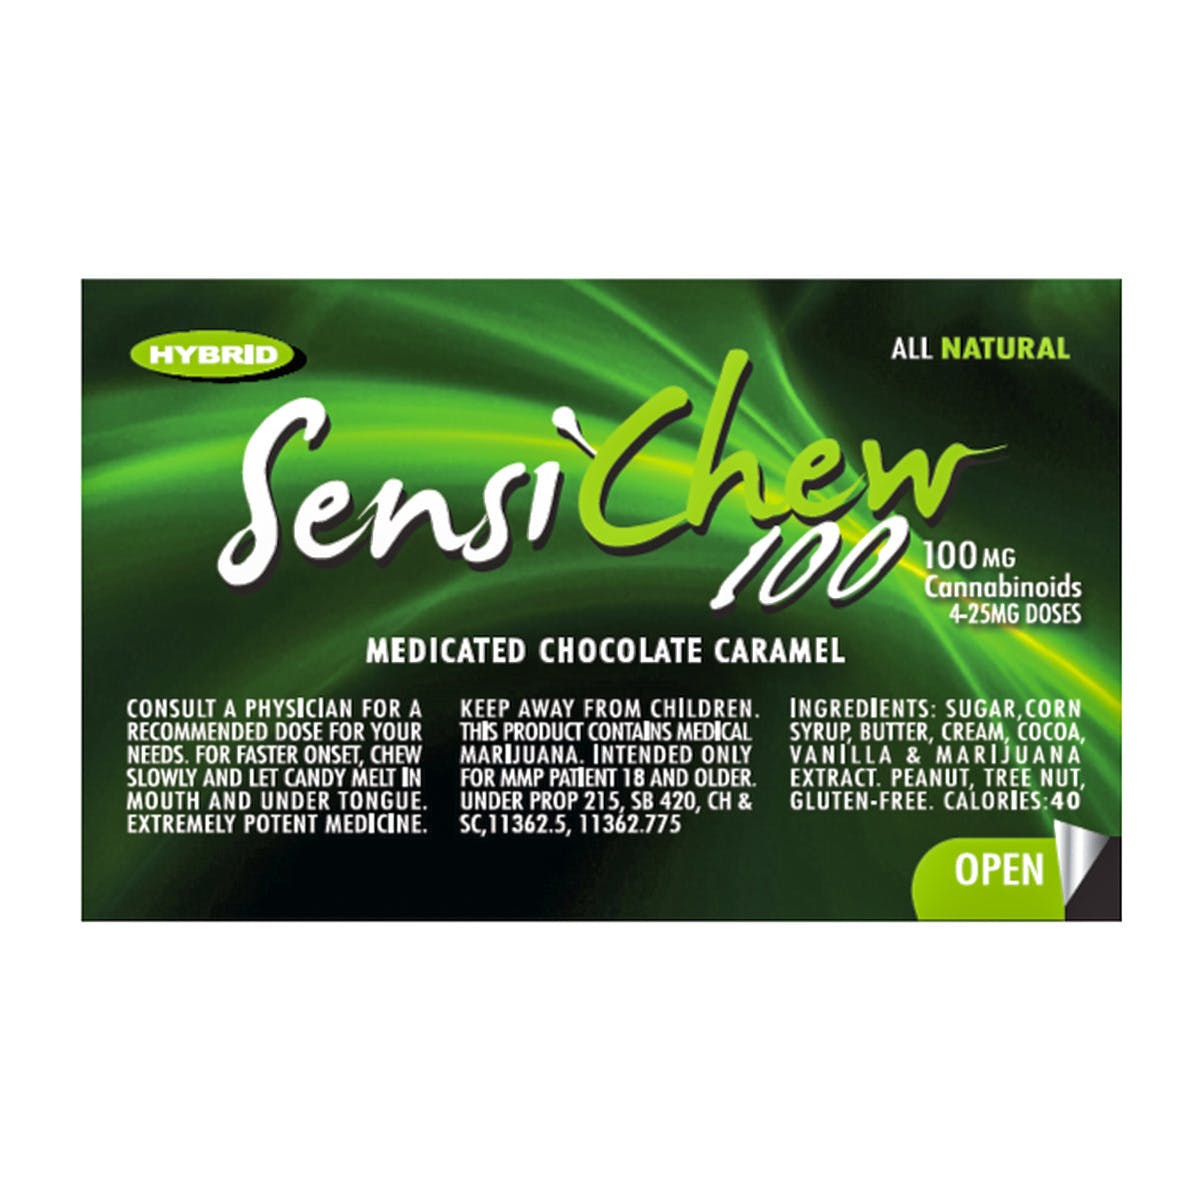 marijuana-dispensaries-cannabal-city-collective-los-angeles-in-los-angeles-sensi-chew-100-2c-hybrid-for-anytime